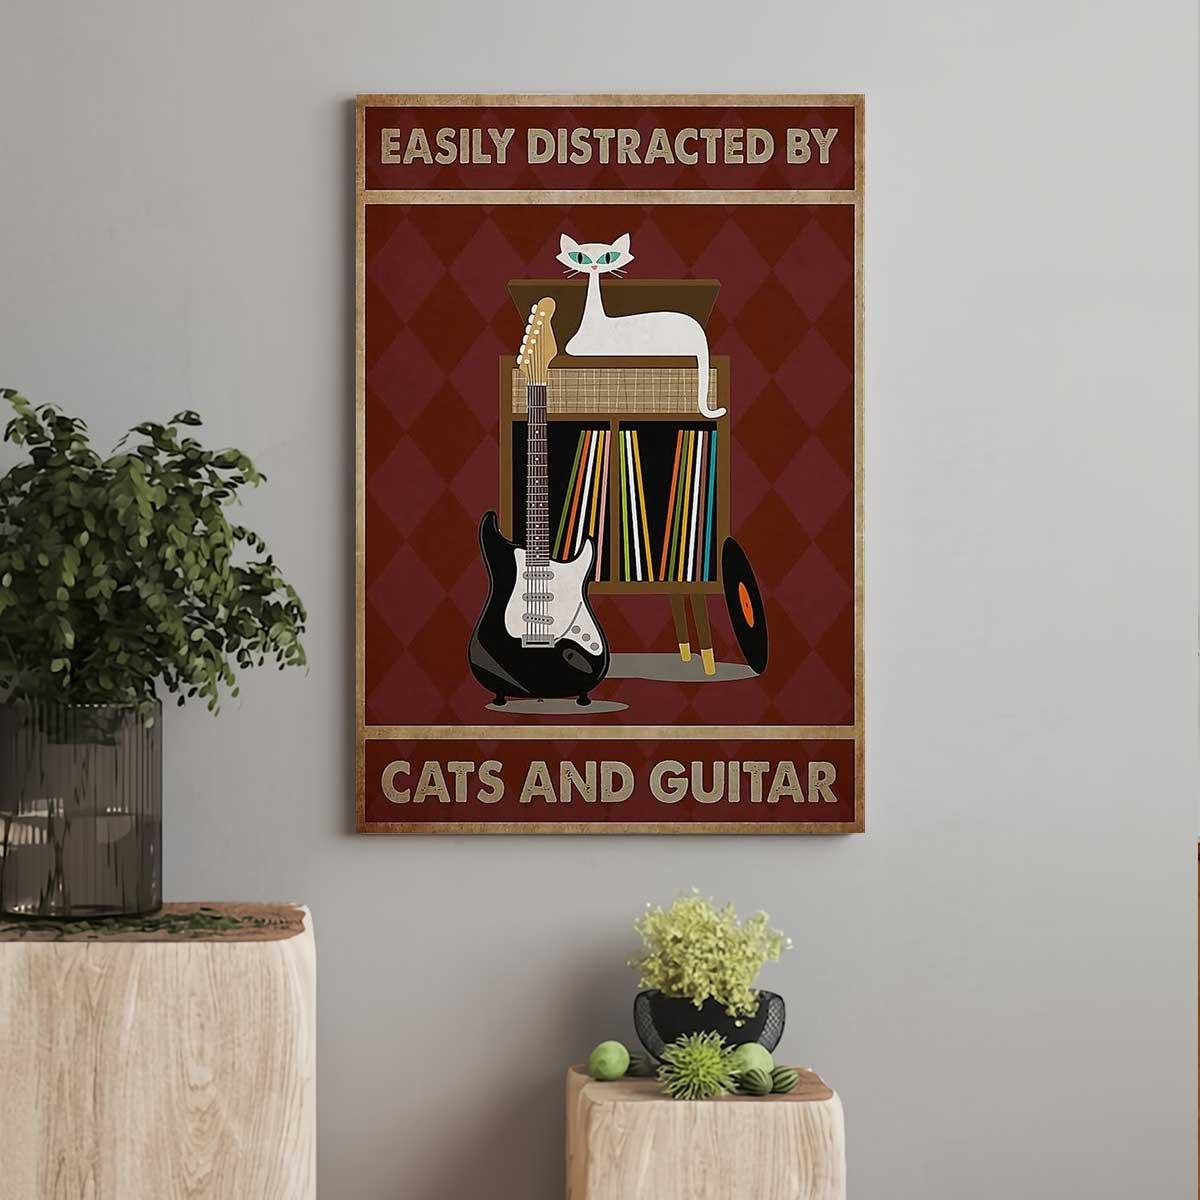 Cat Portrait Canvas - Easily Distracted By Cats And Guitar, Cute Cat Premium Wrapped Canvas - Gift For Cat Lovers, Guitar Lovers, Family, Friends - Amzanimalsgift